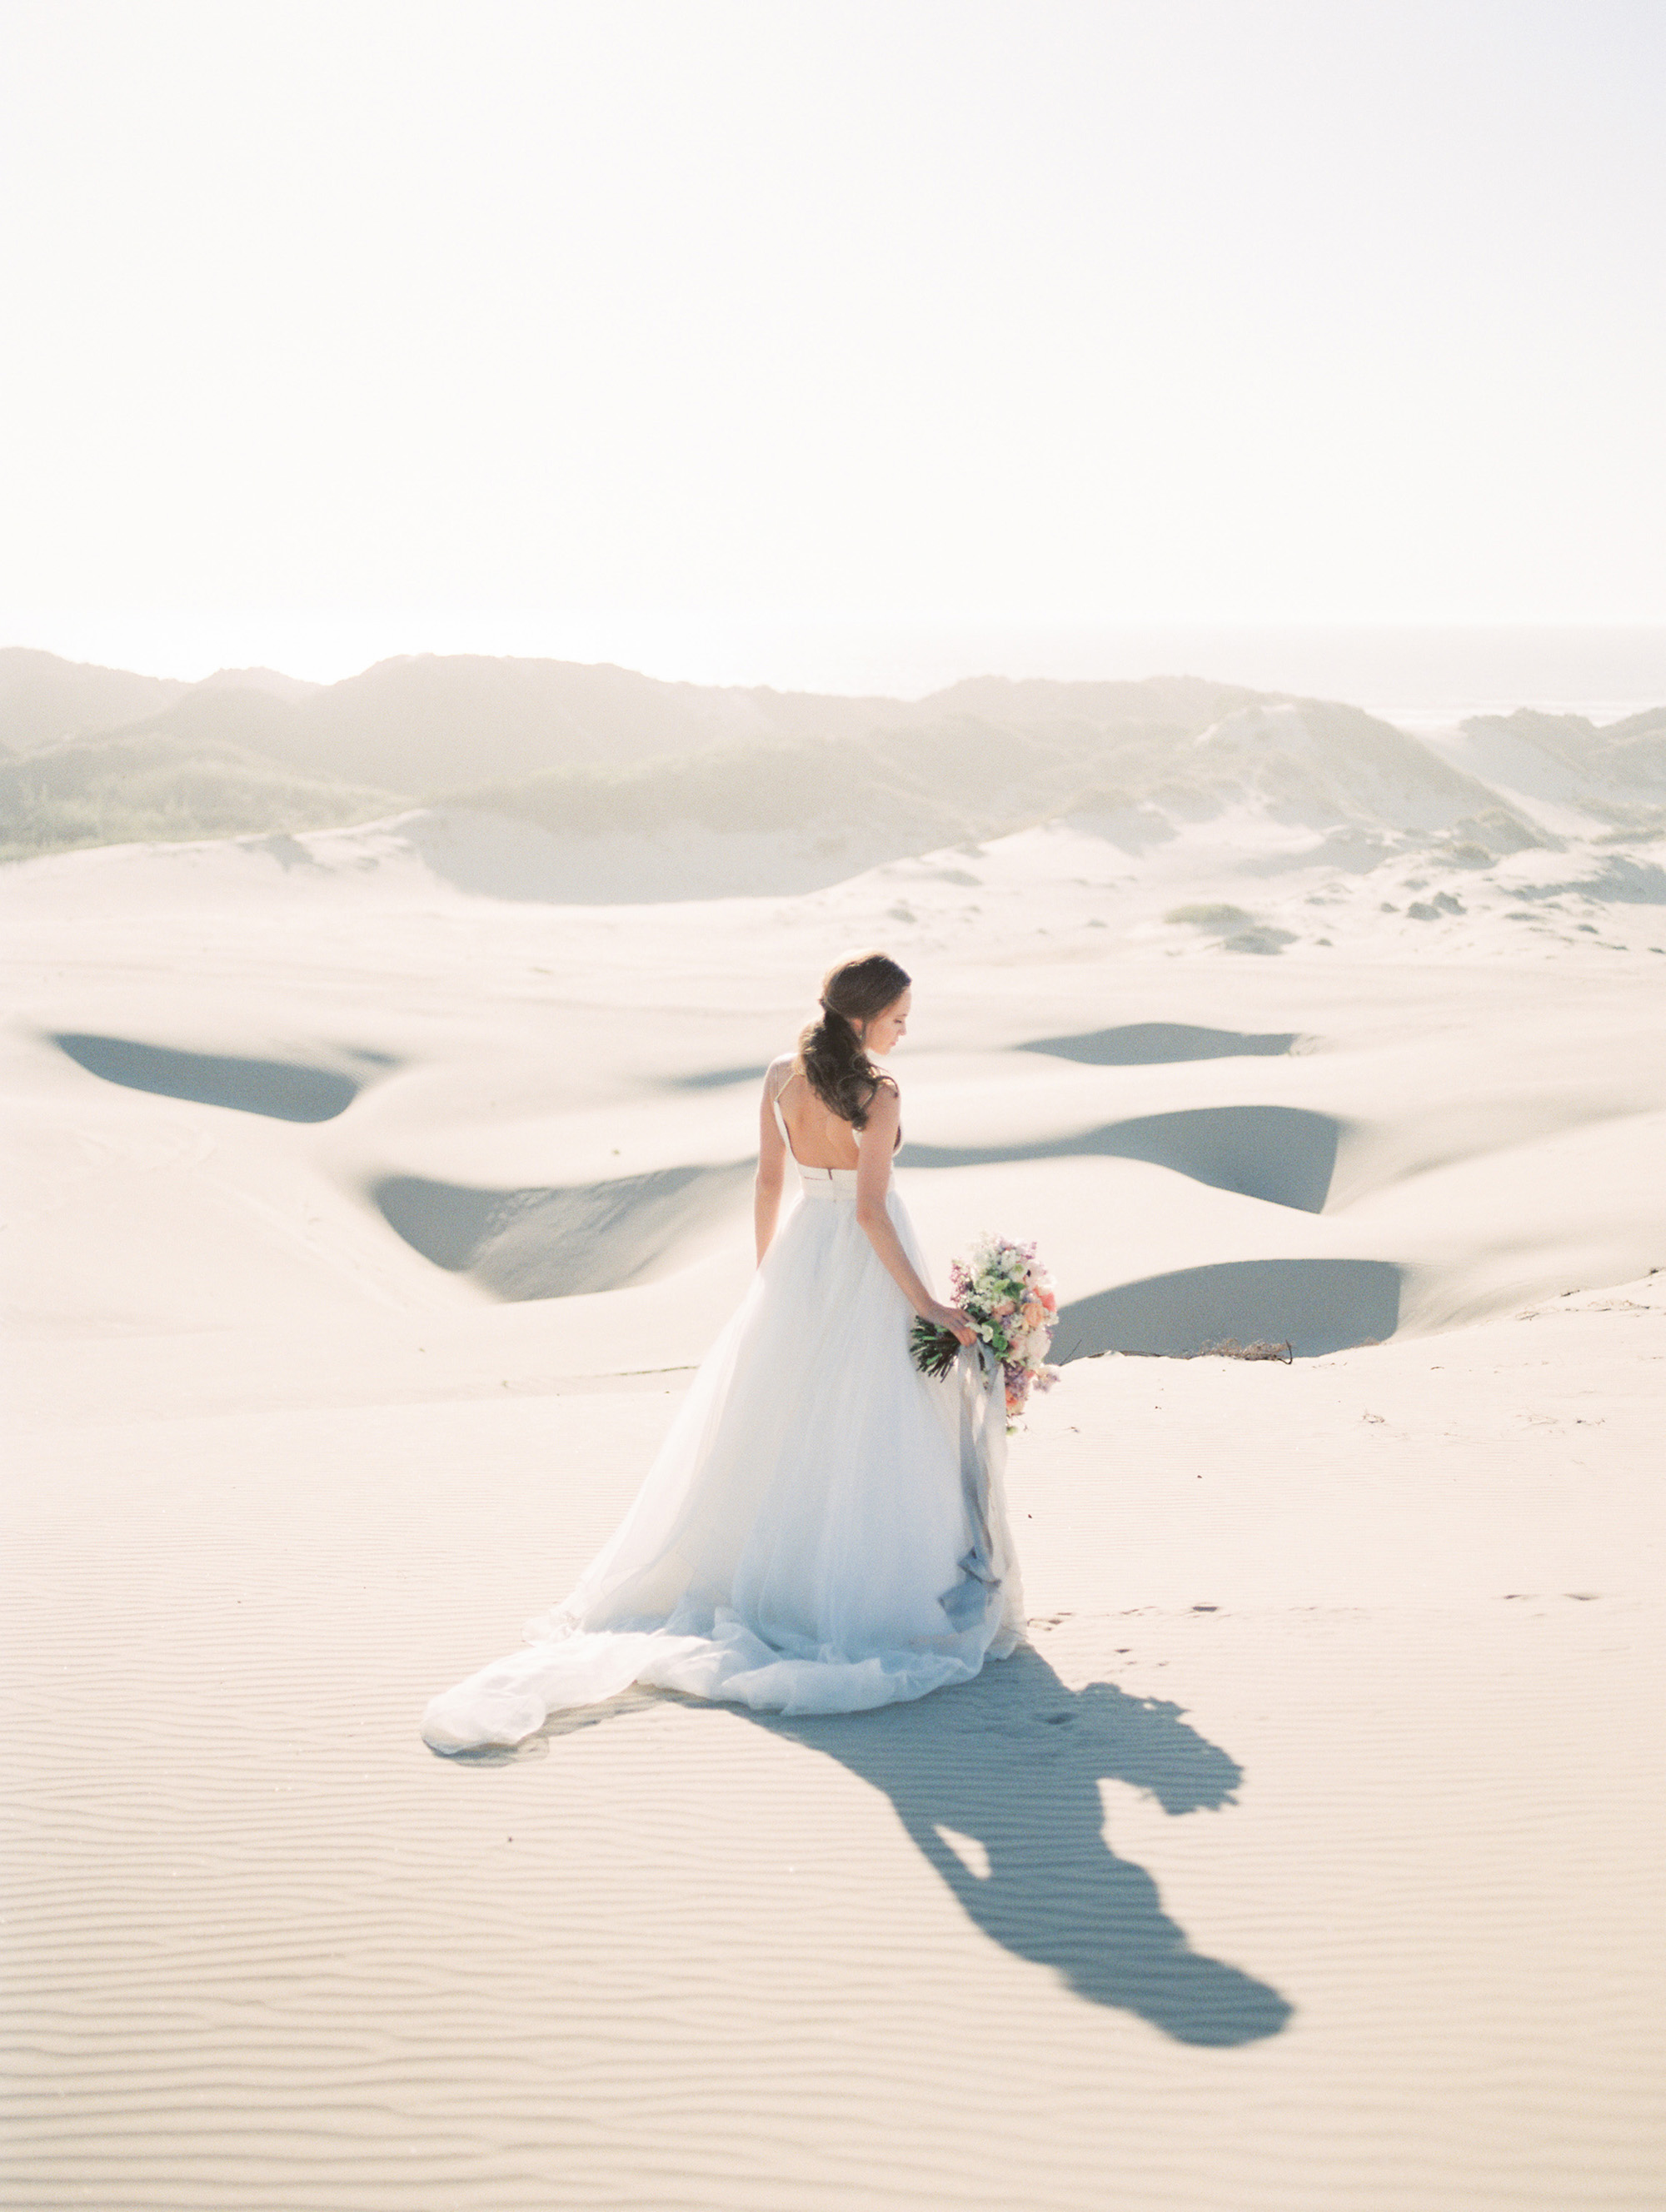 Santa Barbara elopement featured on Style Me Pretty